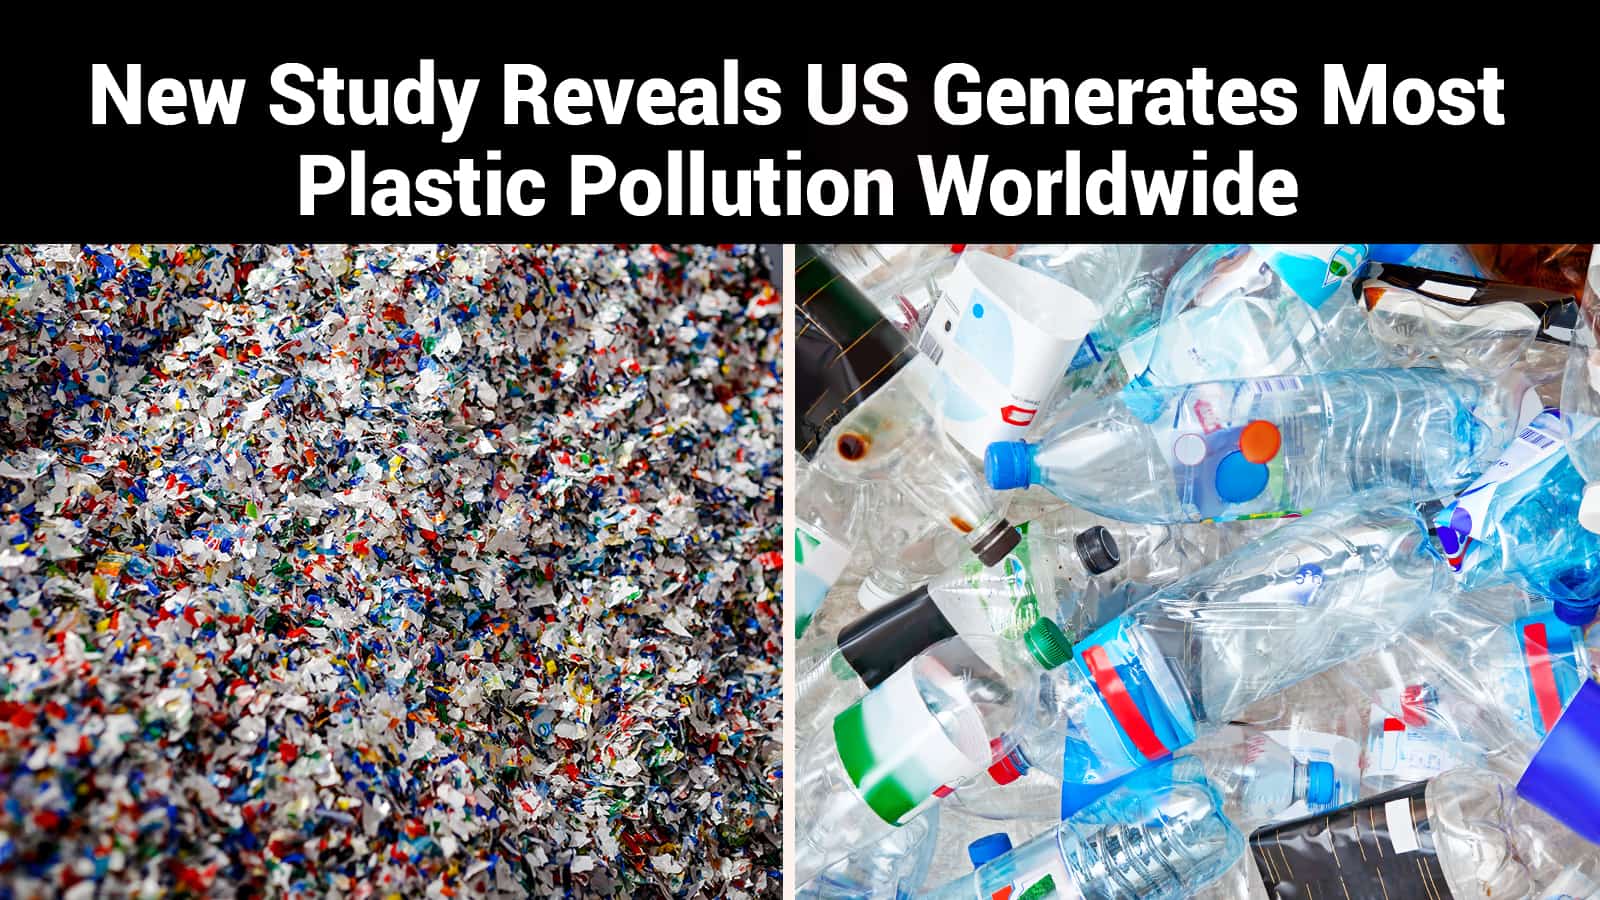 New Study Reveals US Generates Most Plastic Pollution Worldwide